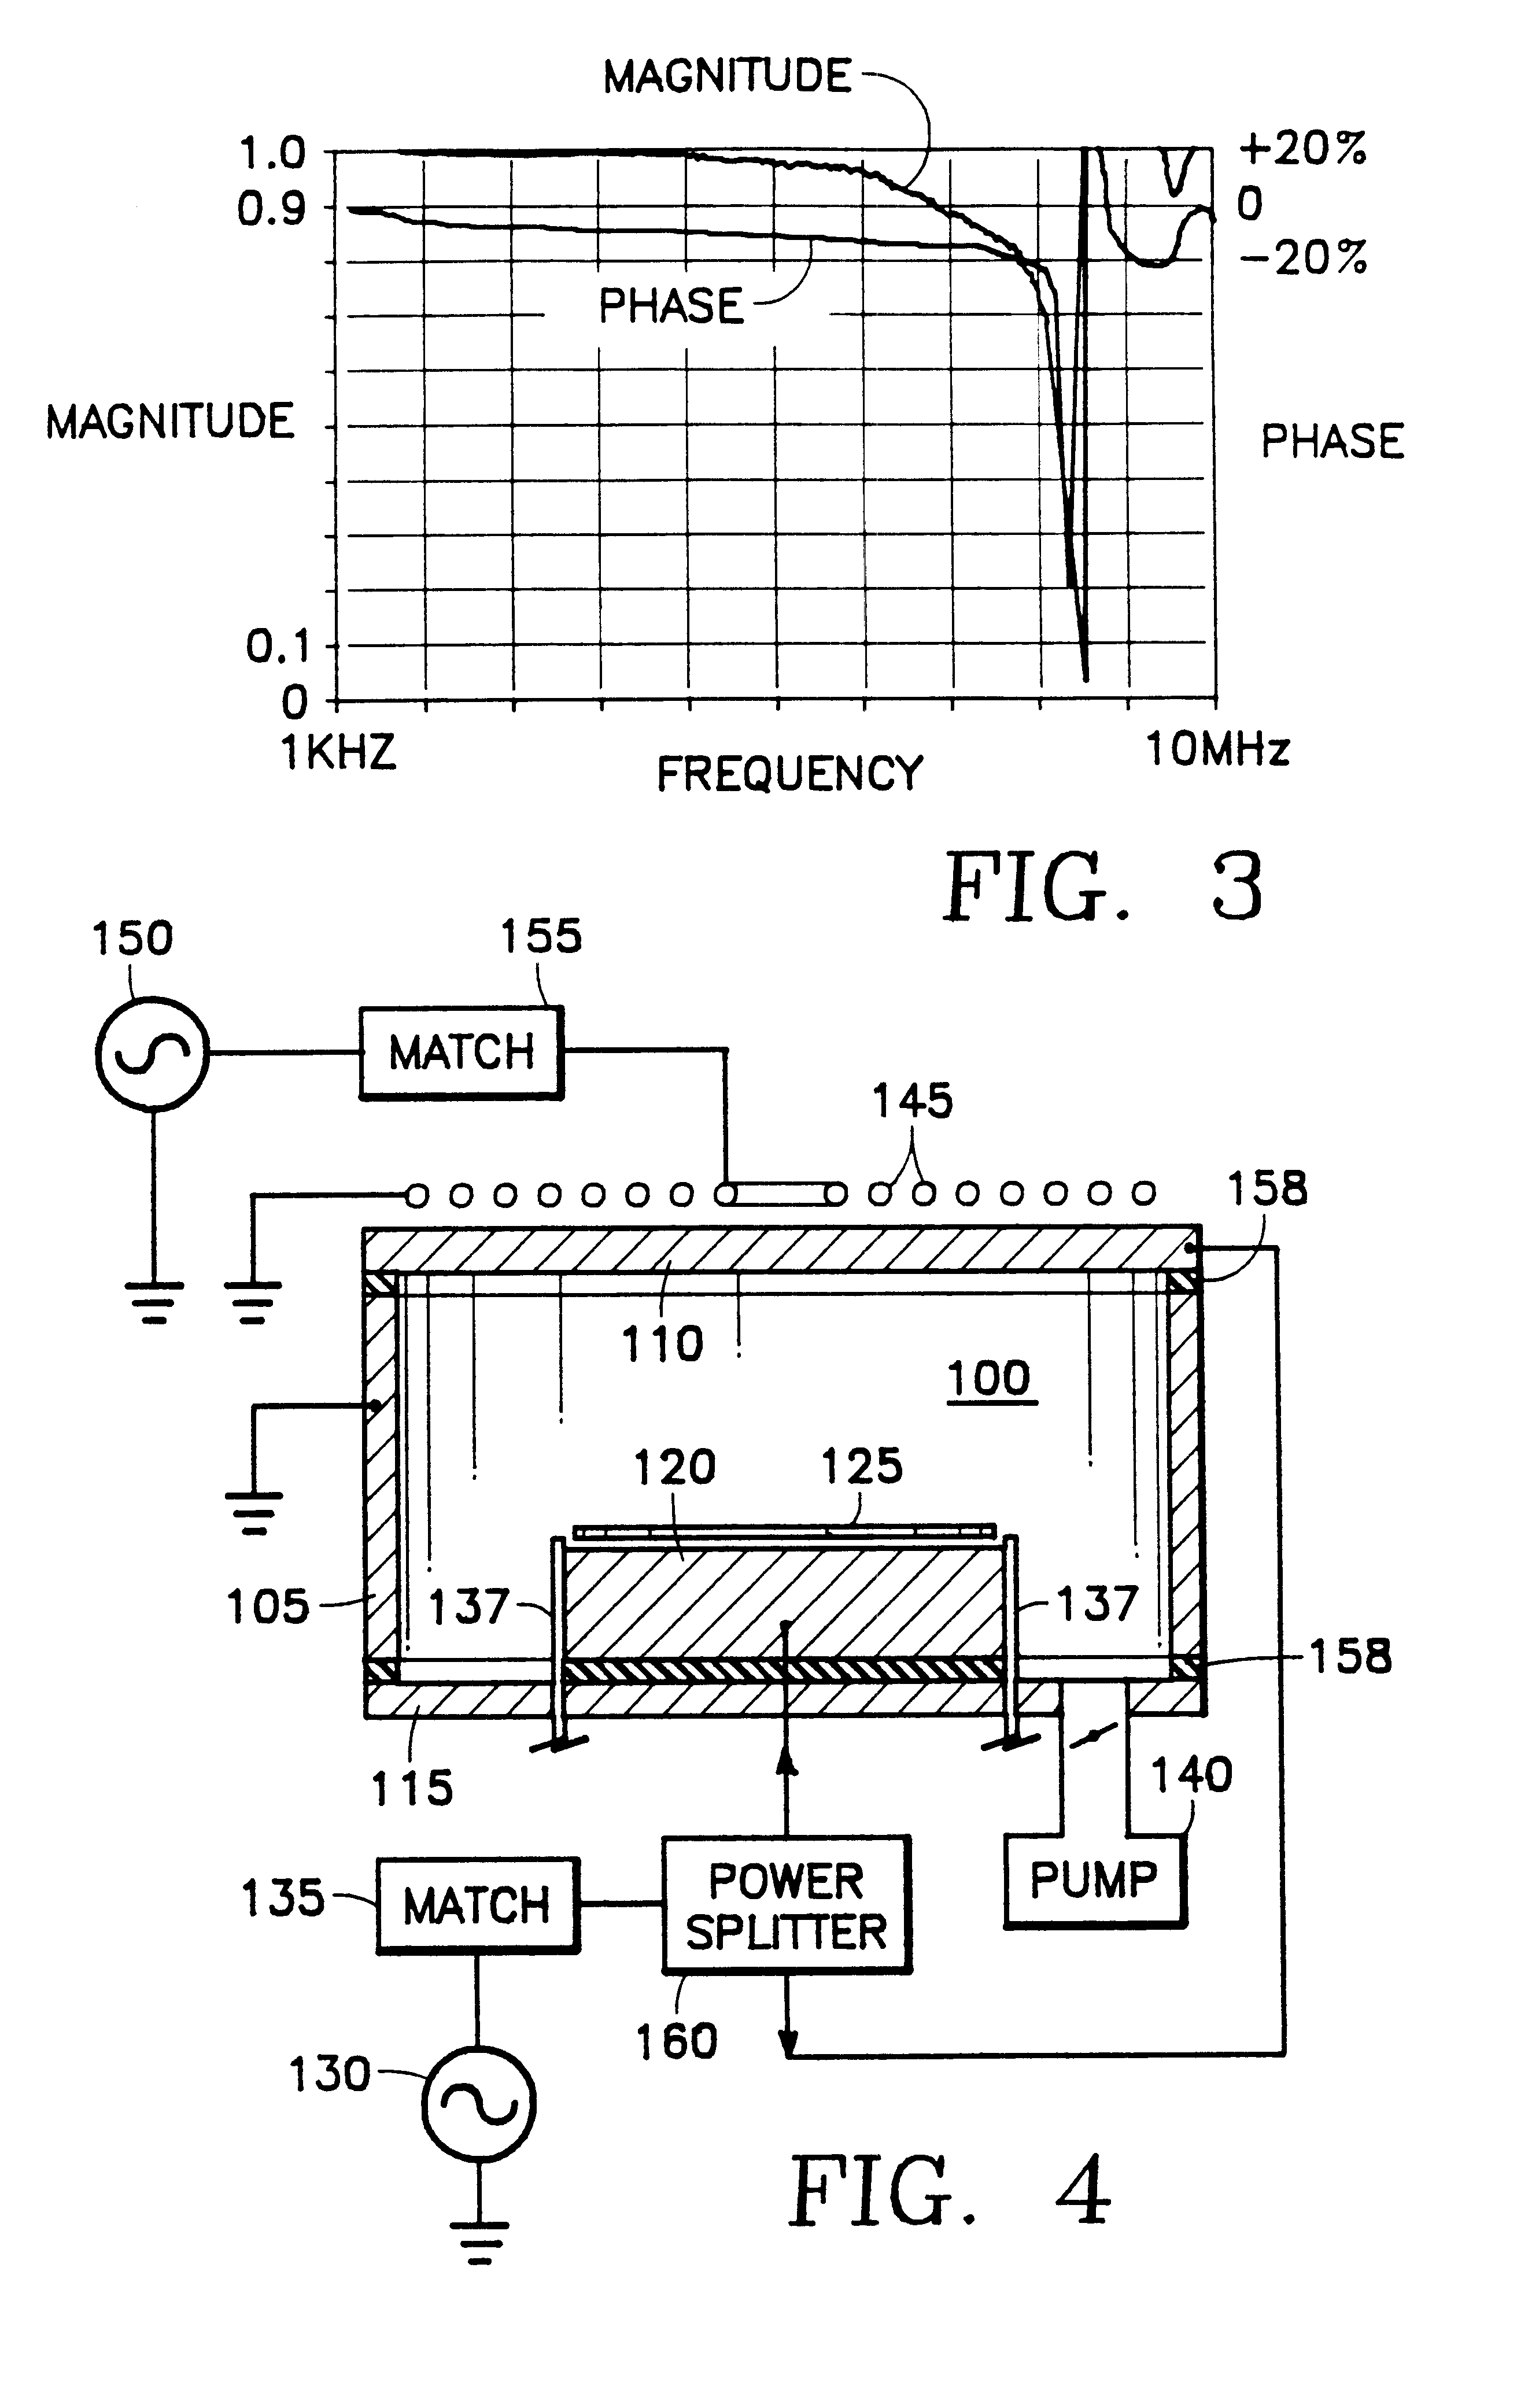 Parallel-plate electrode plasma reactor having an inductive antenna and adjustable radial distribution of plasma ion density